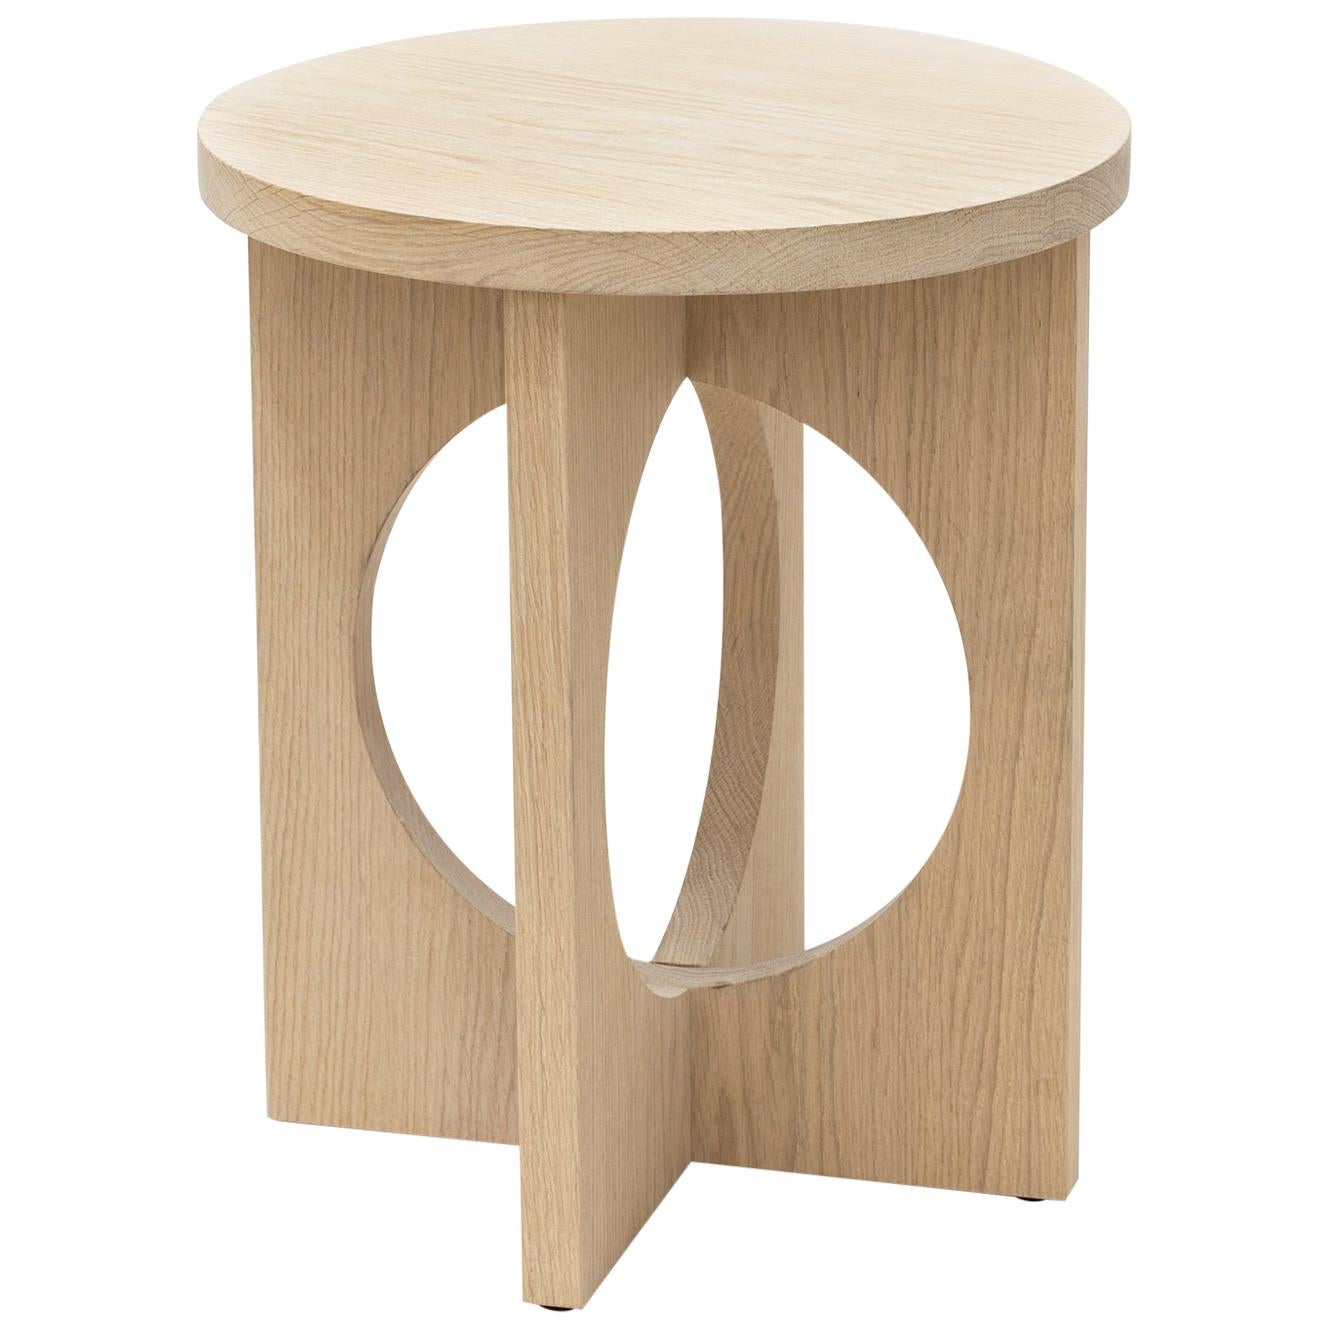 Tron Meyer Wood "Cyclops" Stools or Tables